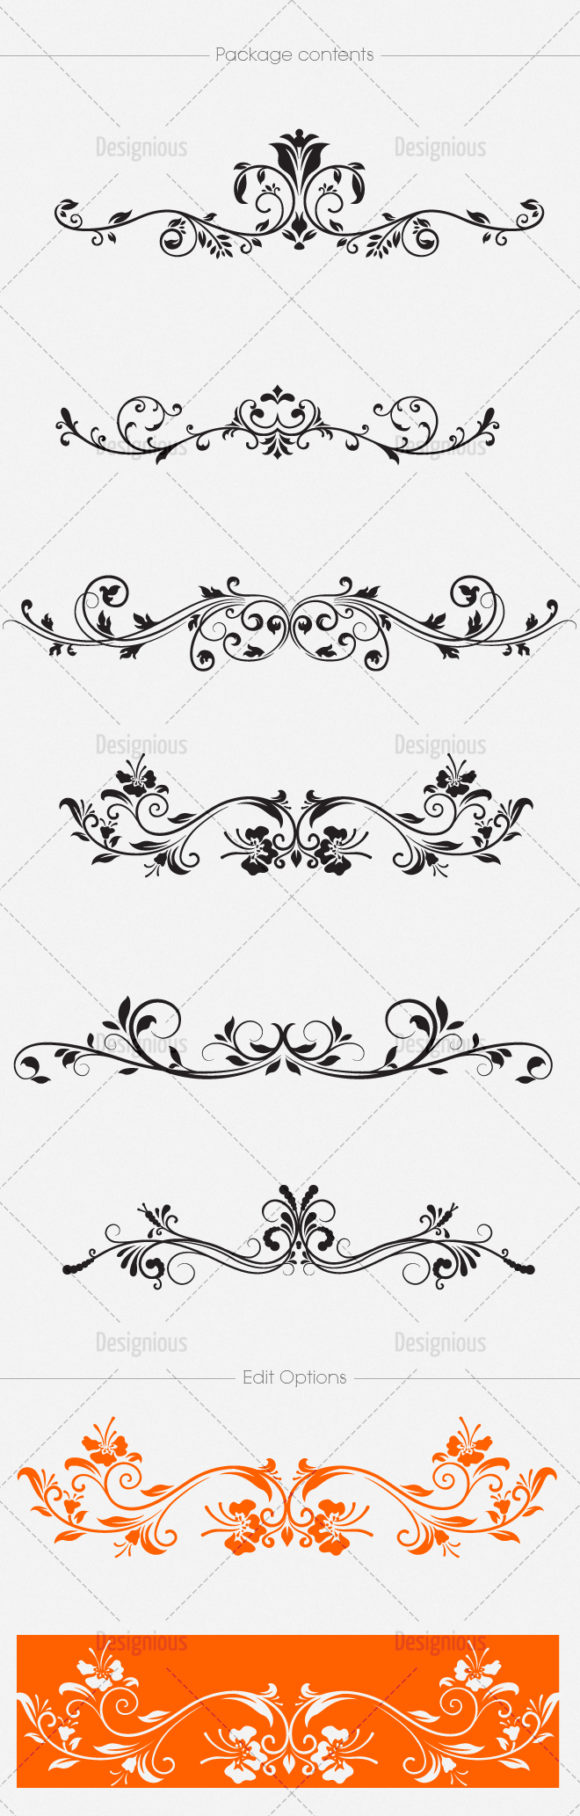 Floral Vector Pack 113 2